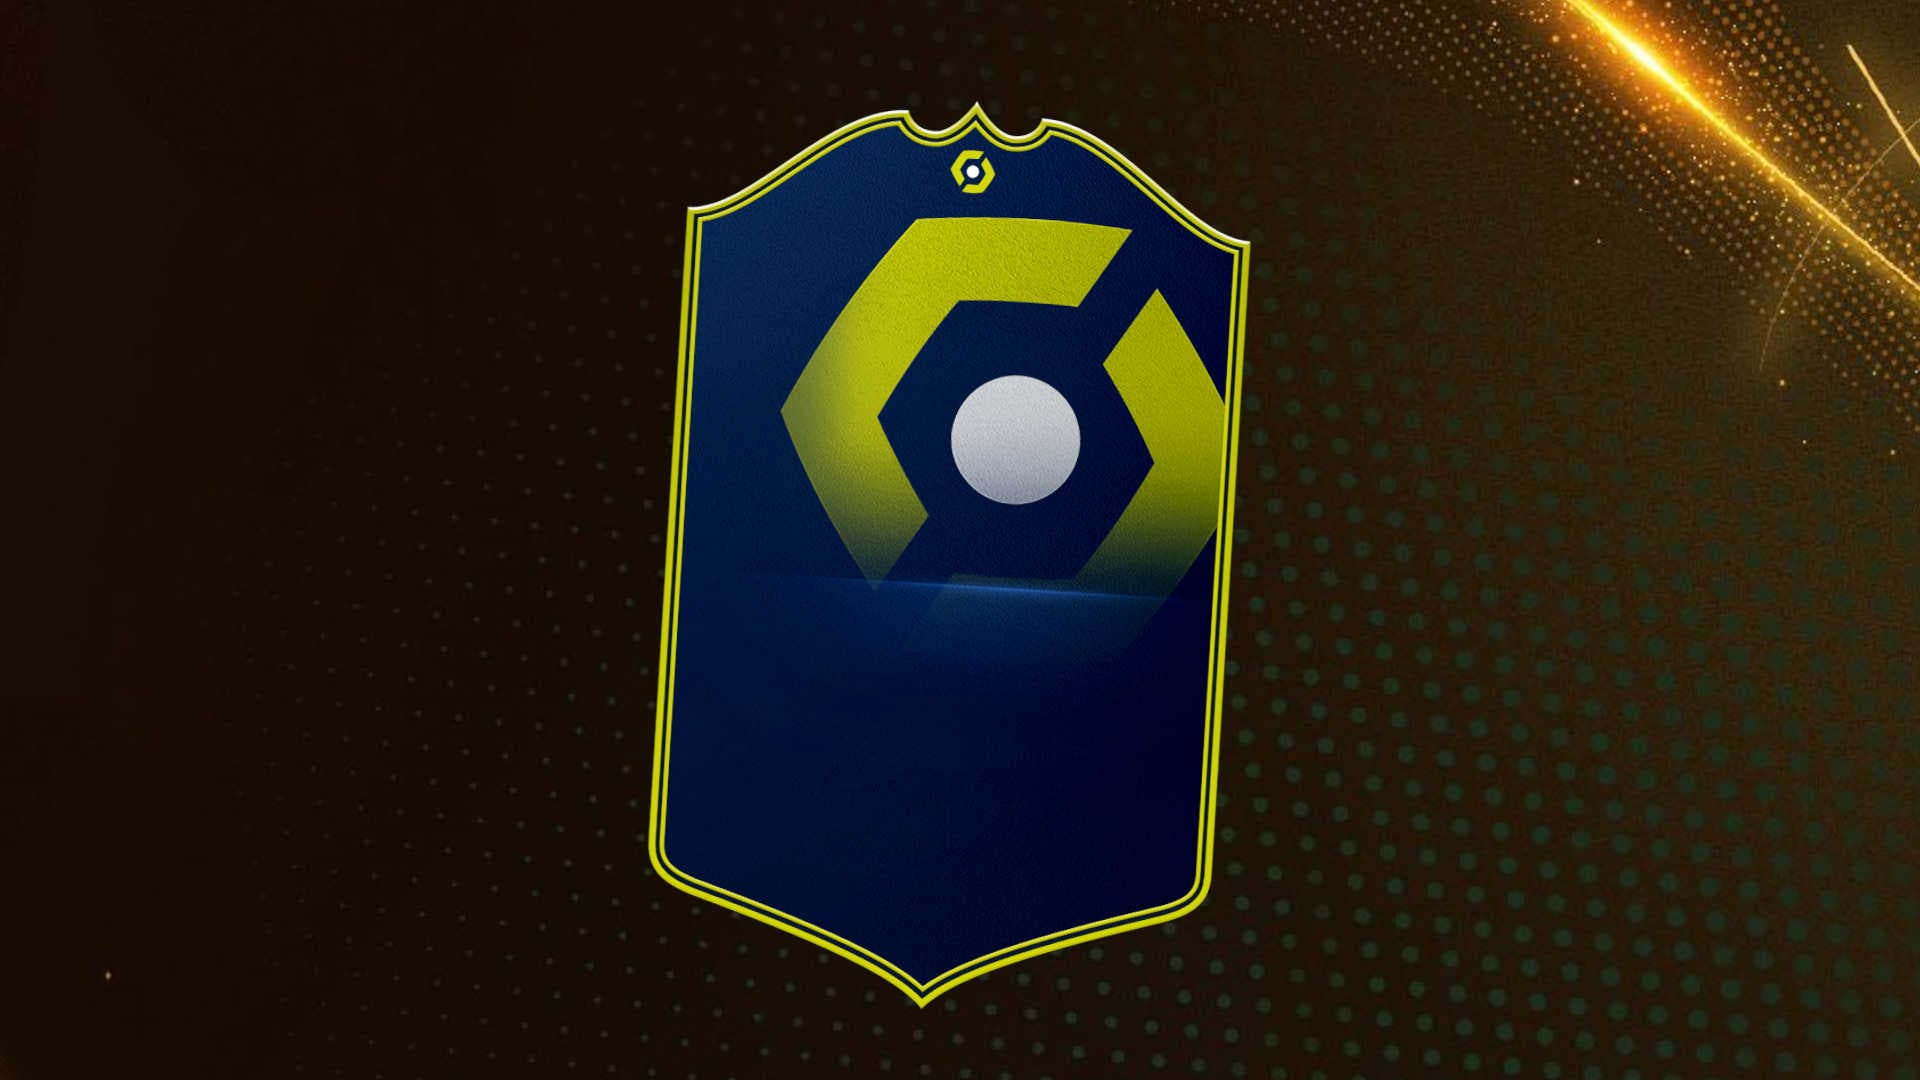 FIFA 23: we already know what the next FUT event and Ligue 1 POTM will be